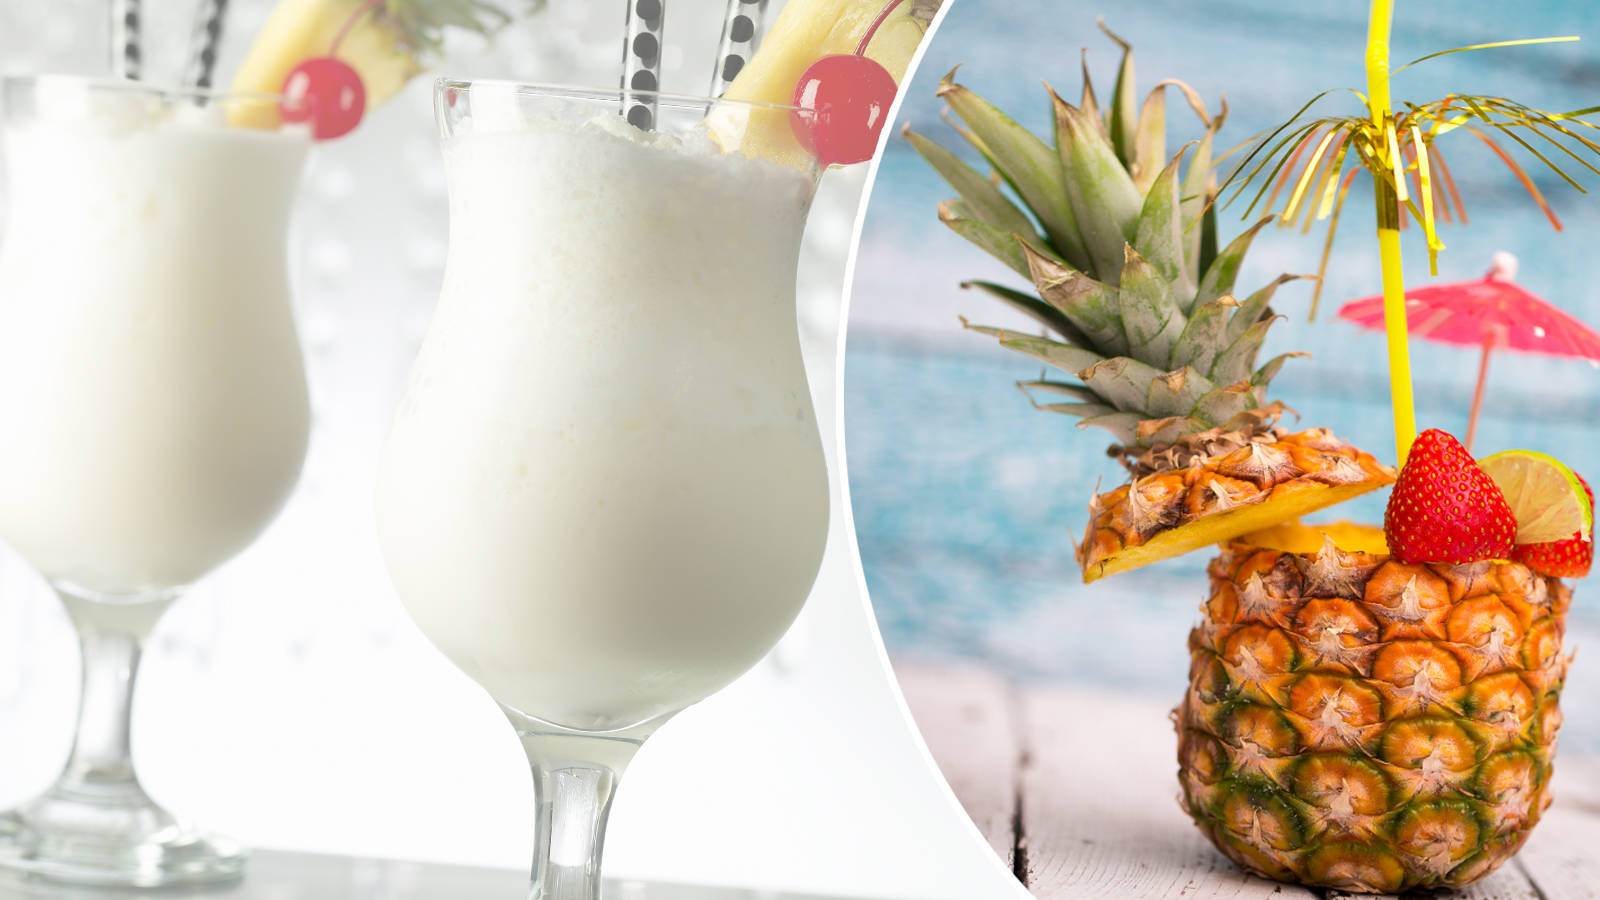 Pina Colada Recipes Classic Non Alcoholic And Delicious Twists On The Tropical Heart,Cheap Flooring That Looks Like Wood